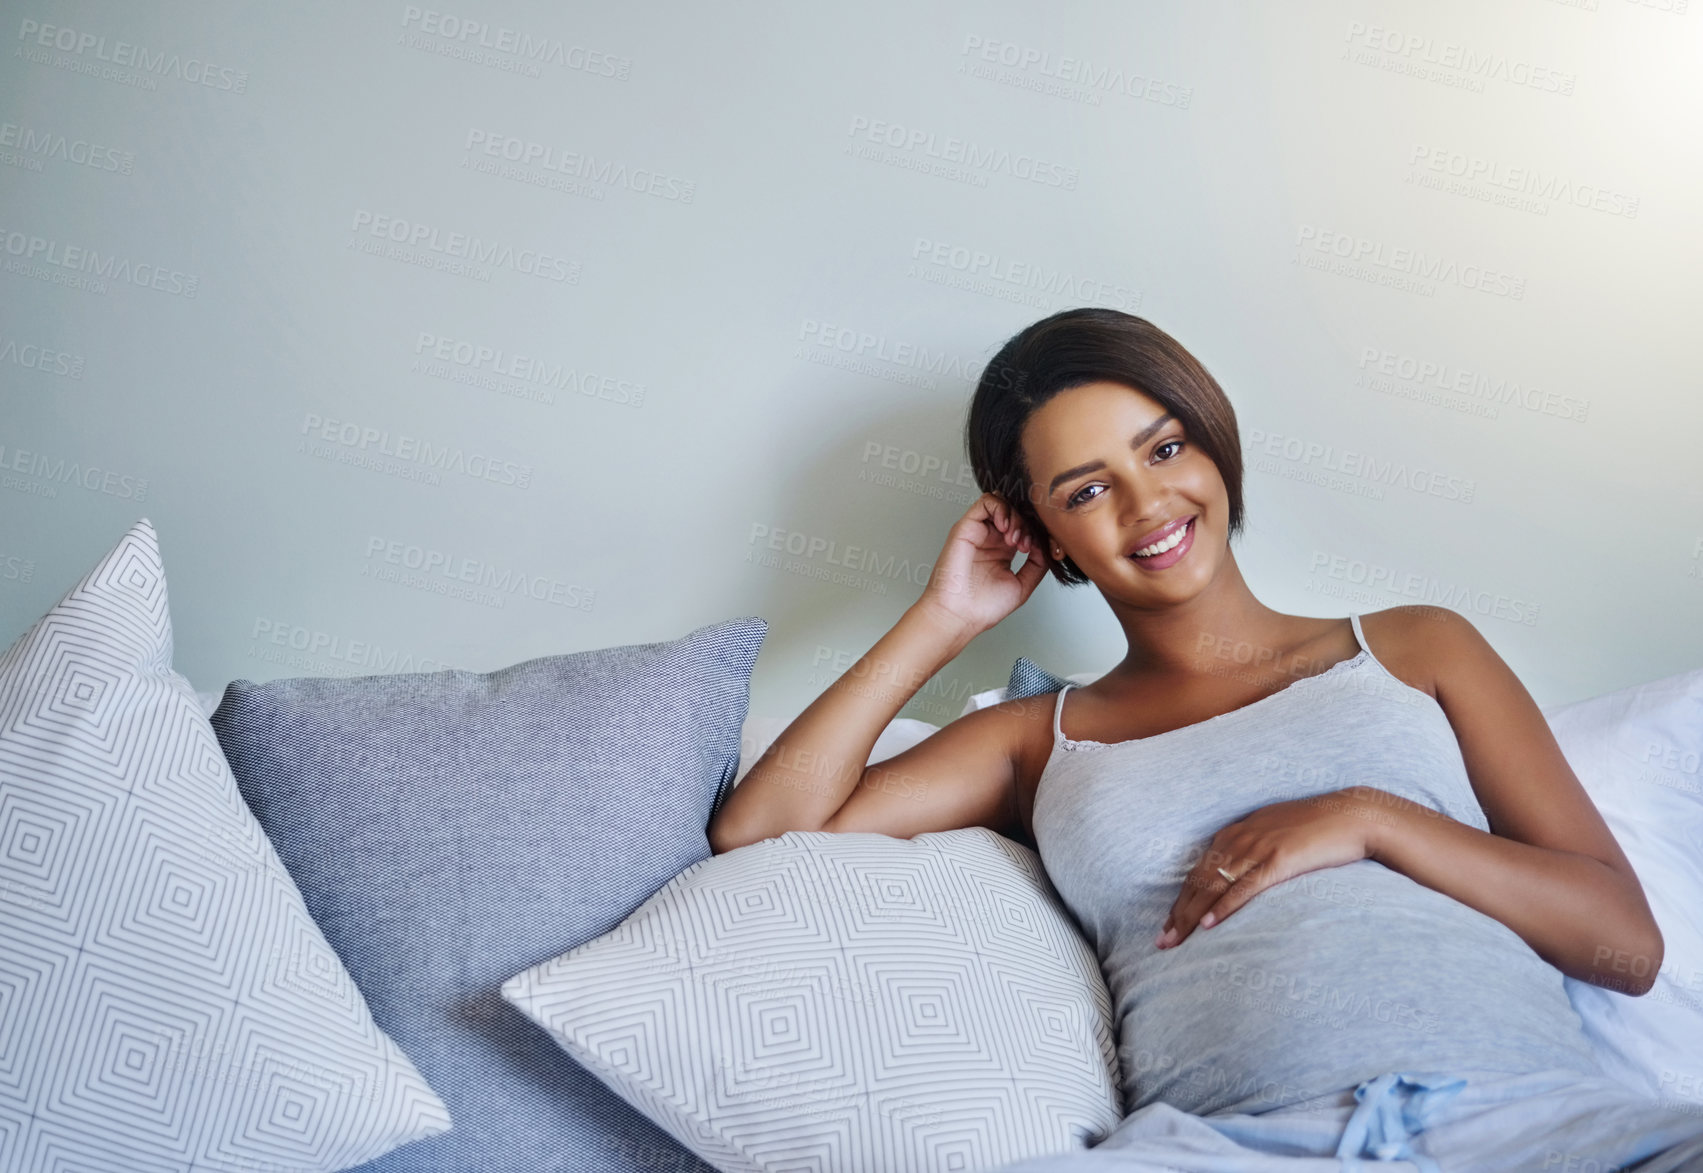 Buy stock photo Shot of a pregnant young woman relaxing on the bed at home